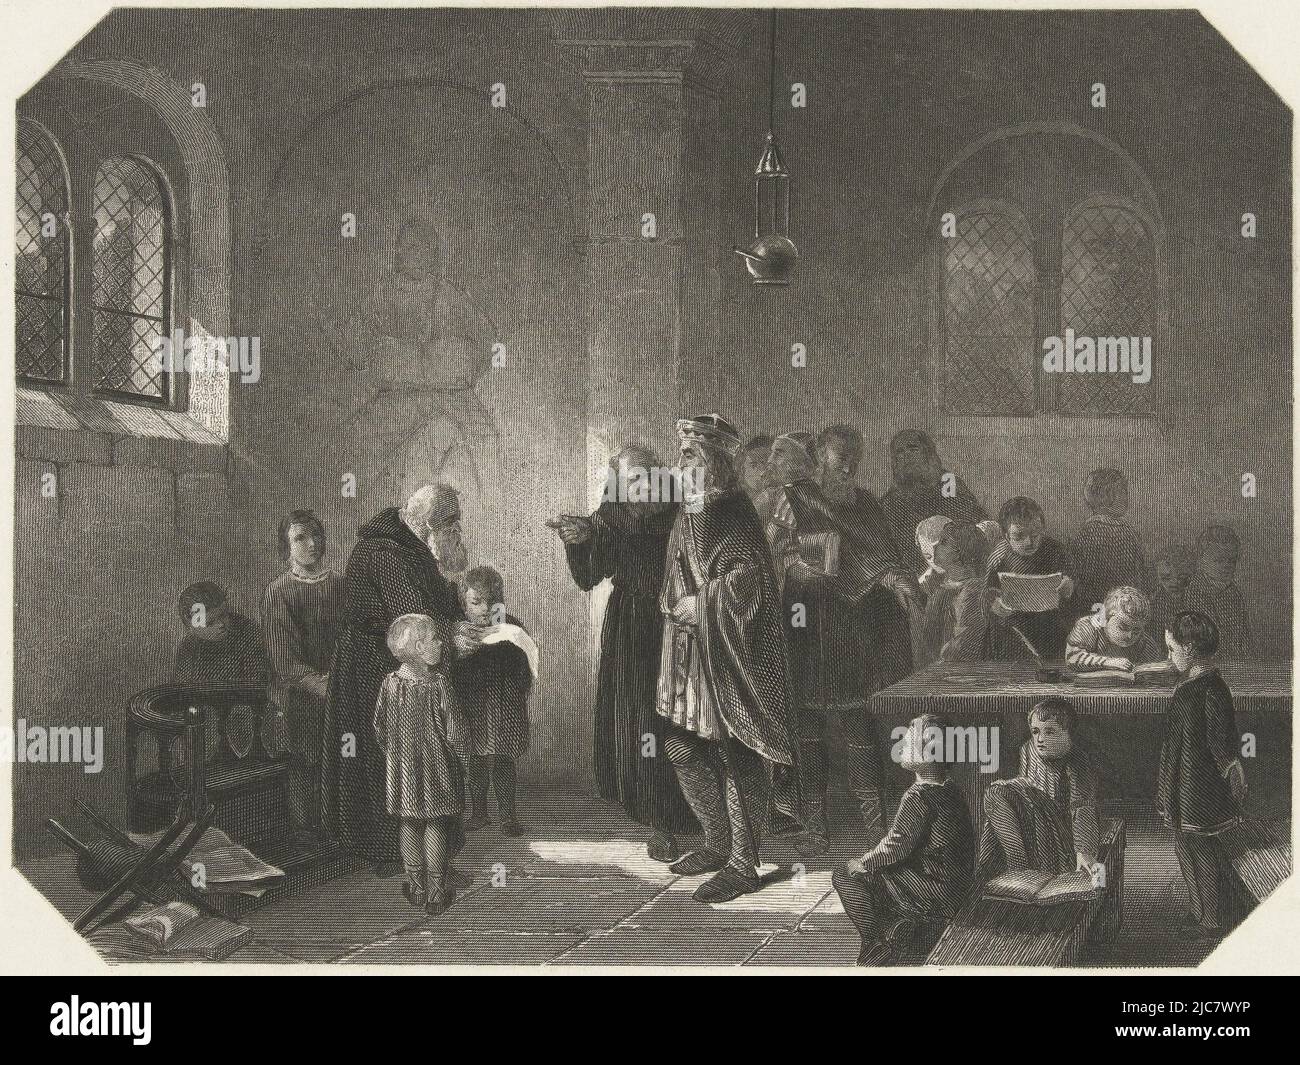 Emperor Charlemagne visiting the St. Martin school in Utrecht in 790. Pupils working on reading and writing. Charlemagne visiting St. Martin's School in Utrecht, 790, print maker: Christiaan Lodewijk van Kesteren, (mentioned on object), after: Mari ten Kate, (mentioned on object), Netherlands, 1865 - 1870, paper, steel engraving, h 190 mm × w 240 mm Stock Photo